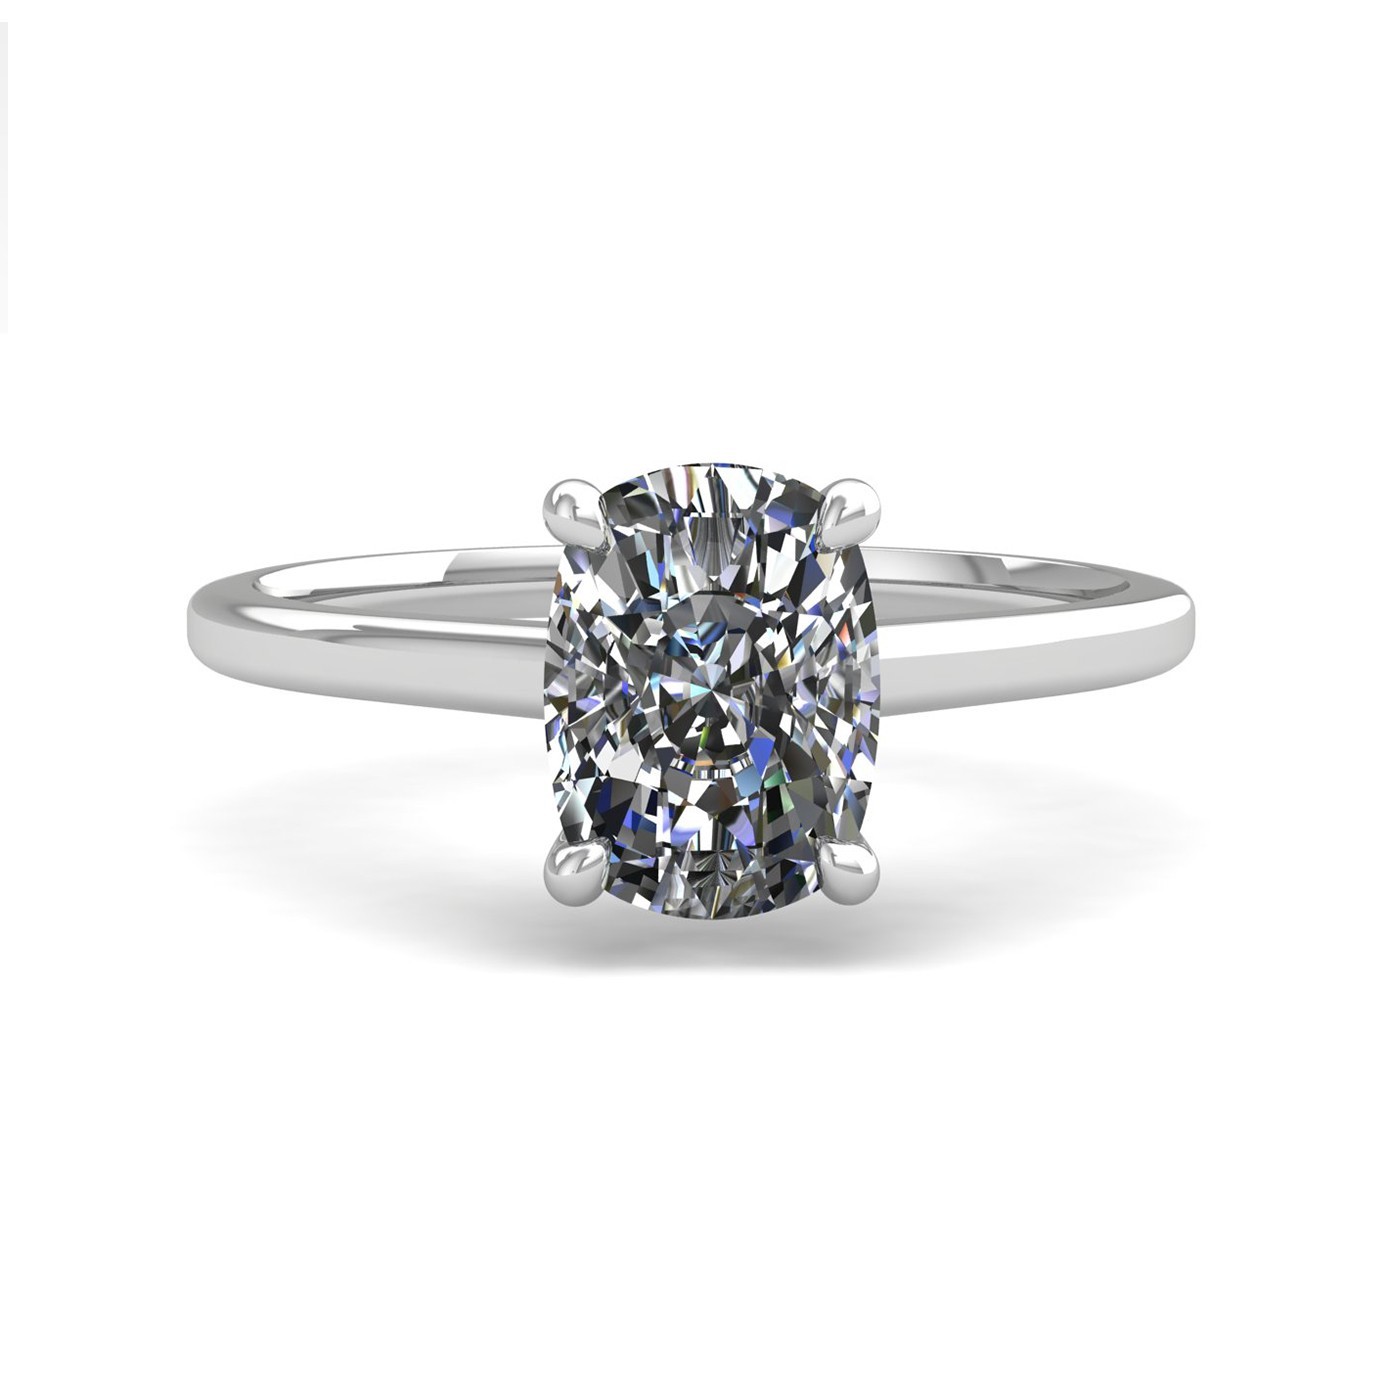 18k white gold 1,00 ct 4 prongs solitaire elongated cushion cut diamond engagement ring with whisper thin band Photos & images